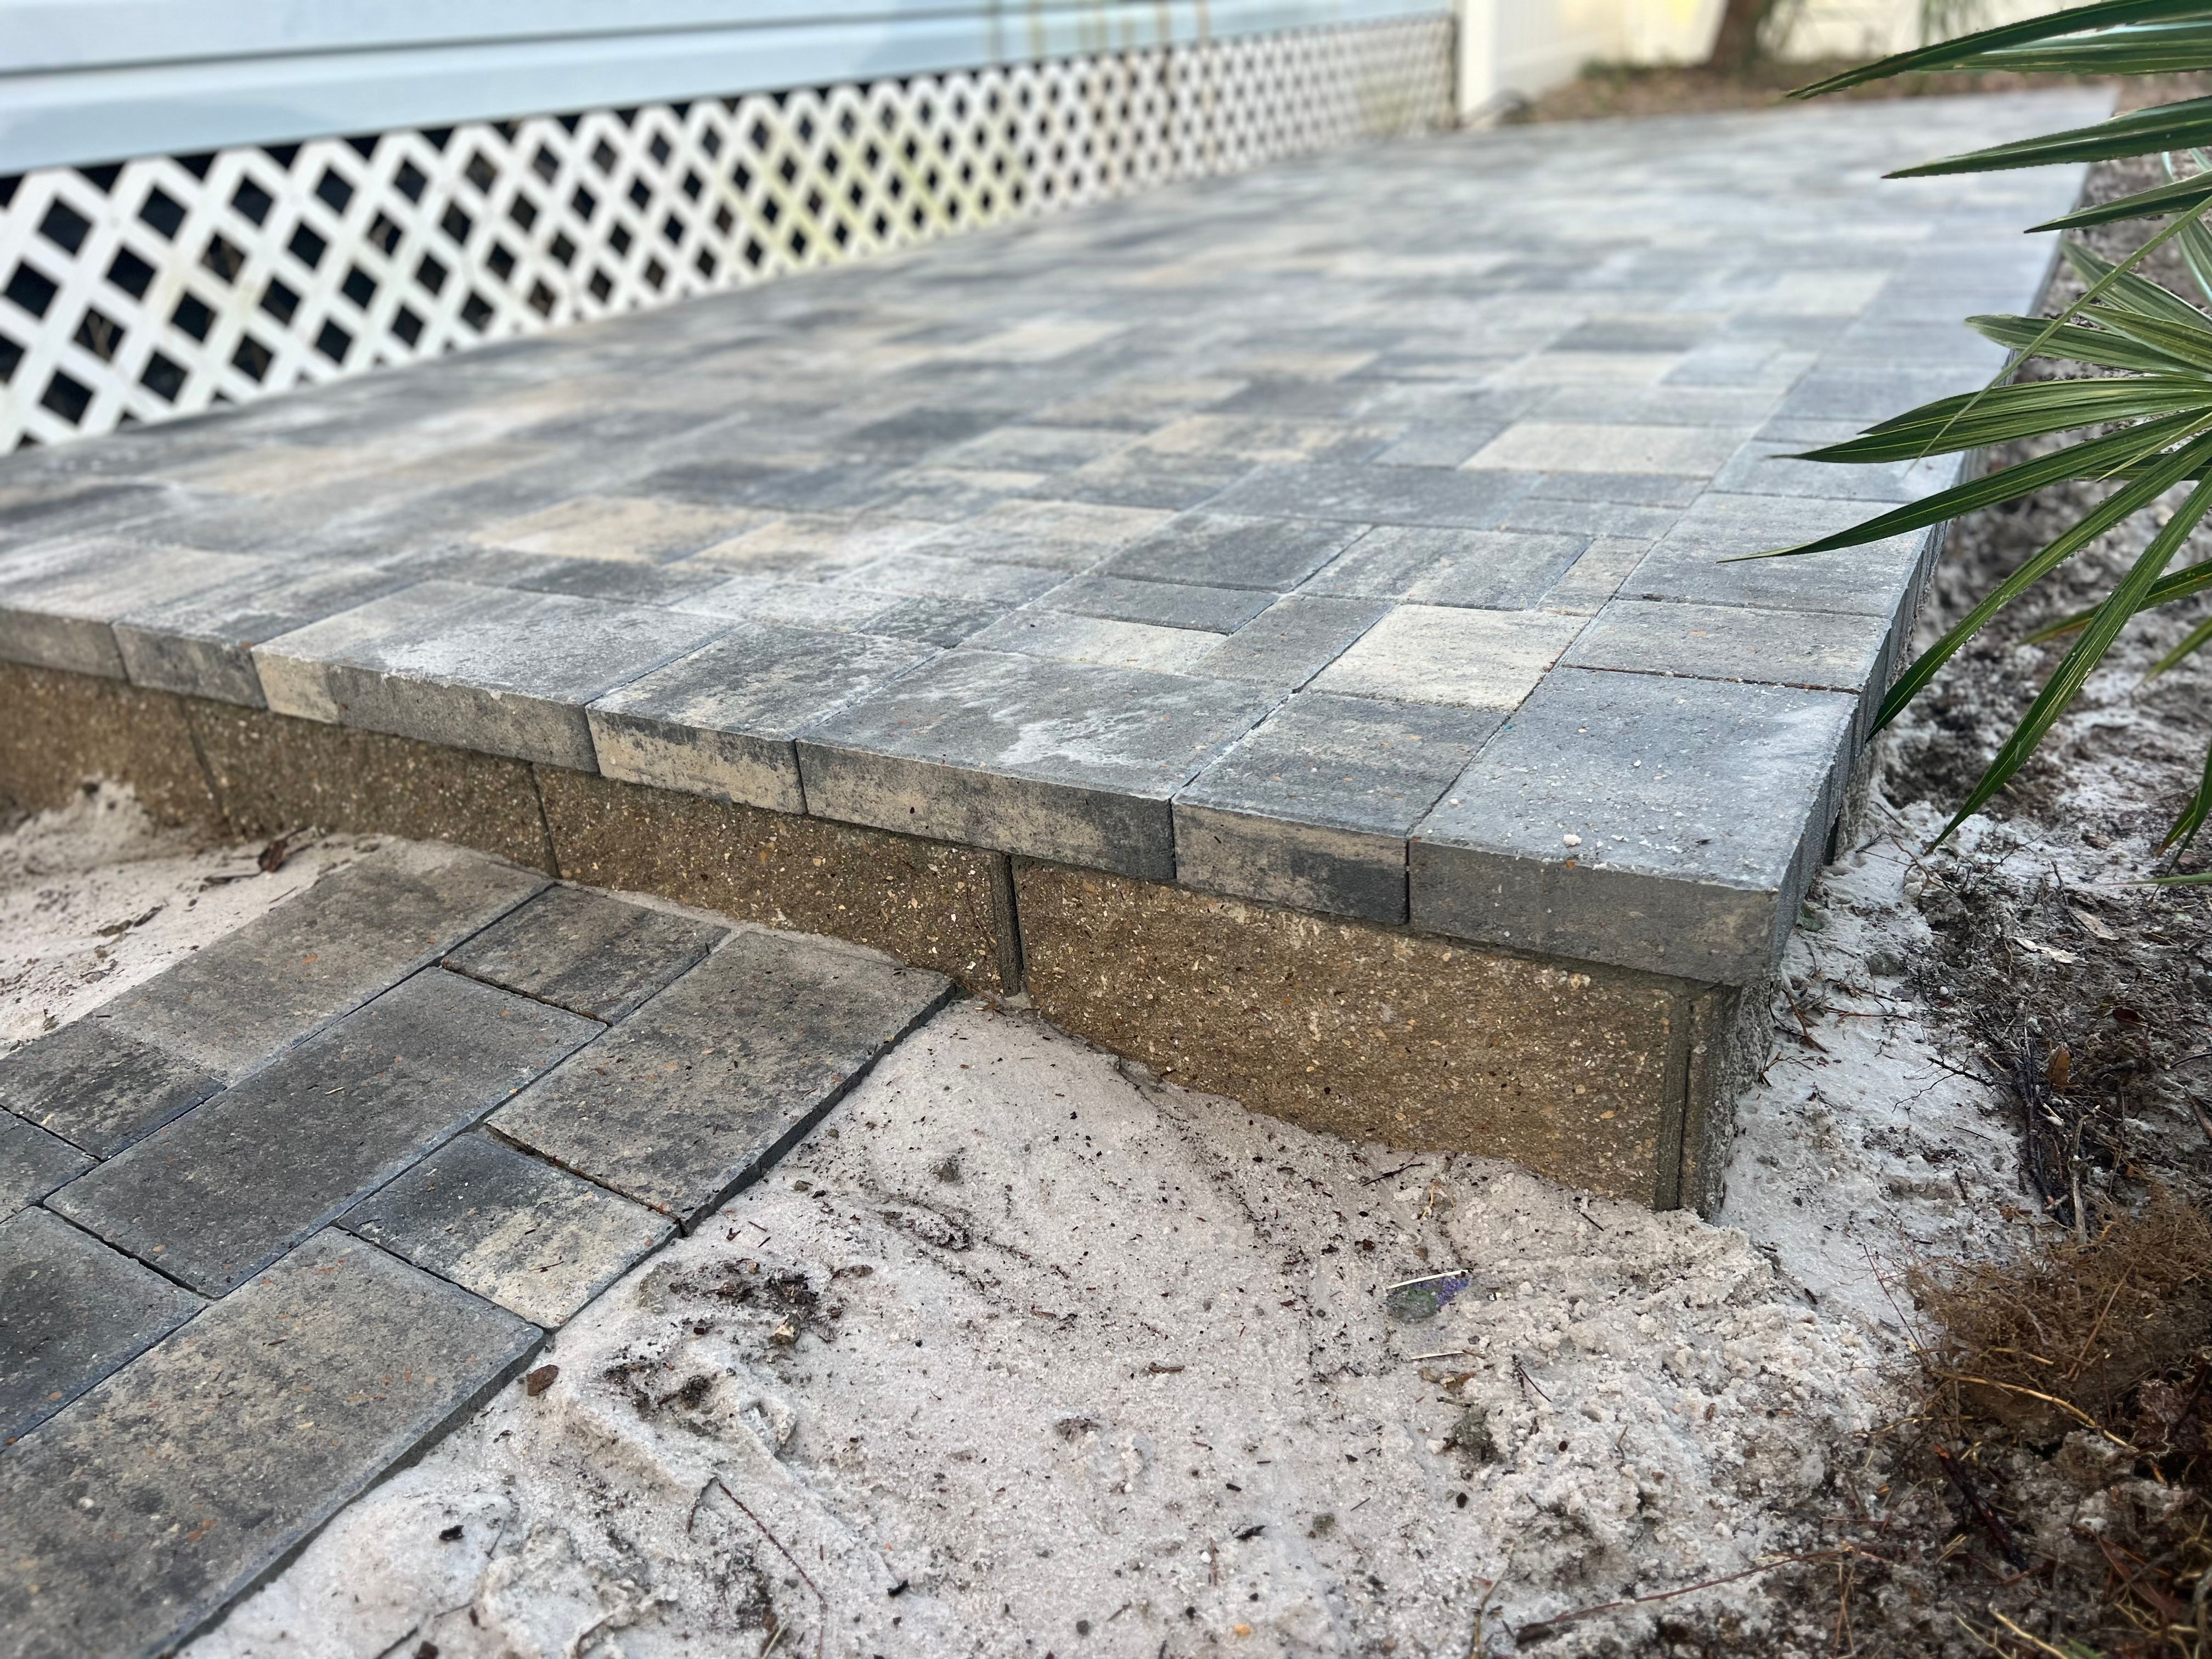 Belgard Pavers for Everything for the Home Inc. in Santa Rosa Beach, FL